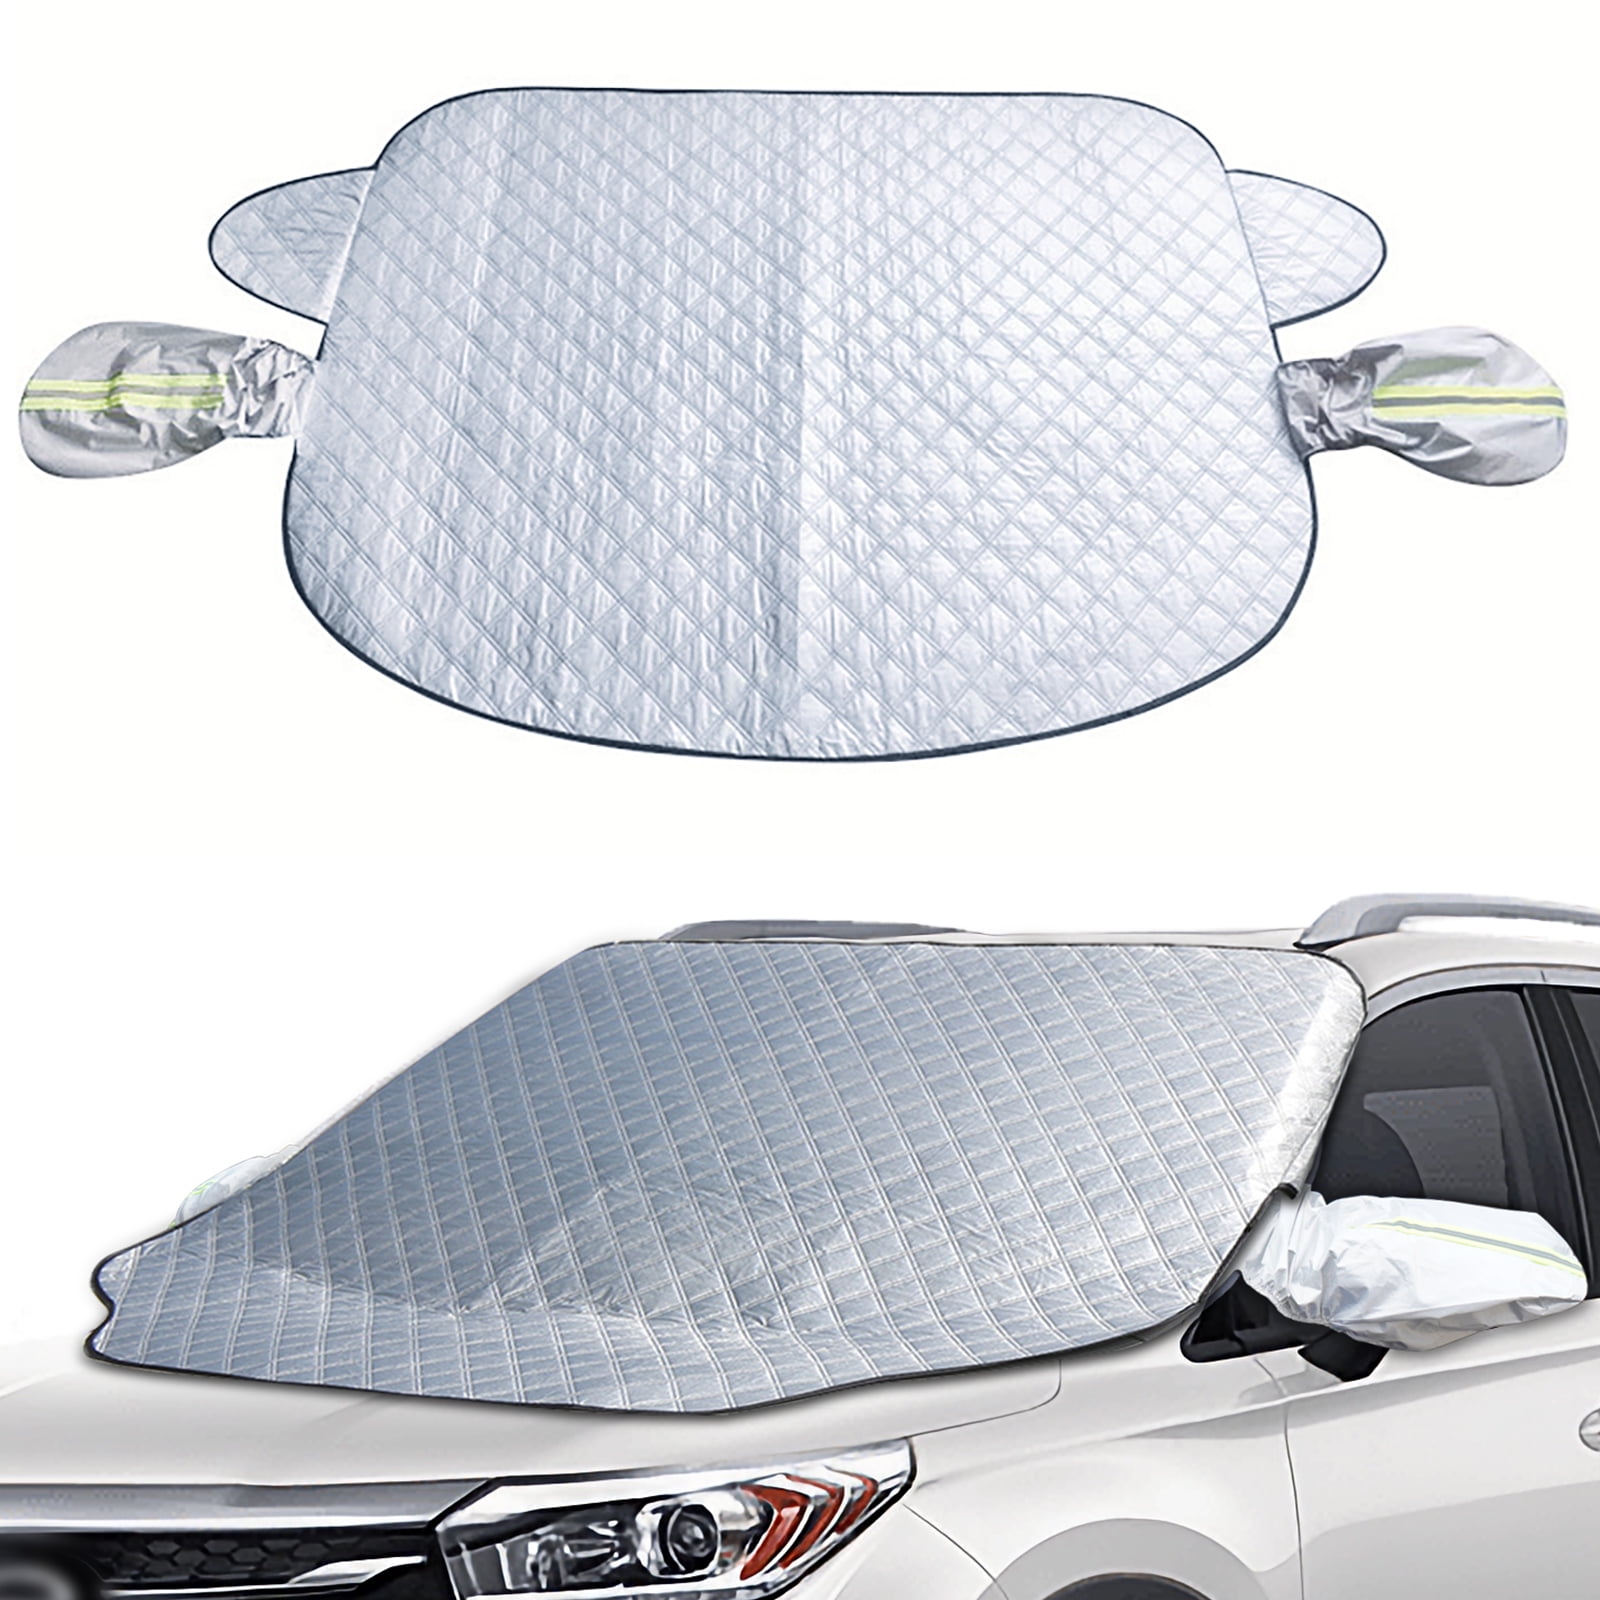 Shatex 88 in. x 43 in. Car Windshield Snow Cover with Magnetic Edge  WSC8843S - The Home Depot